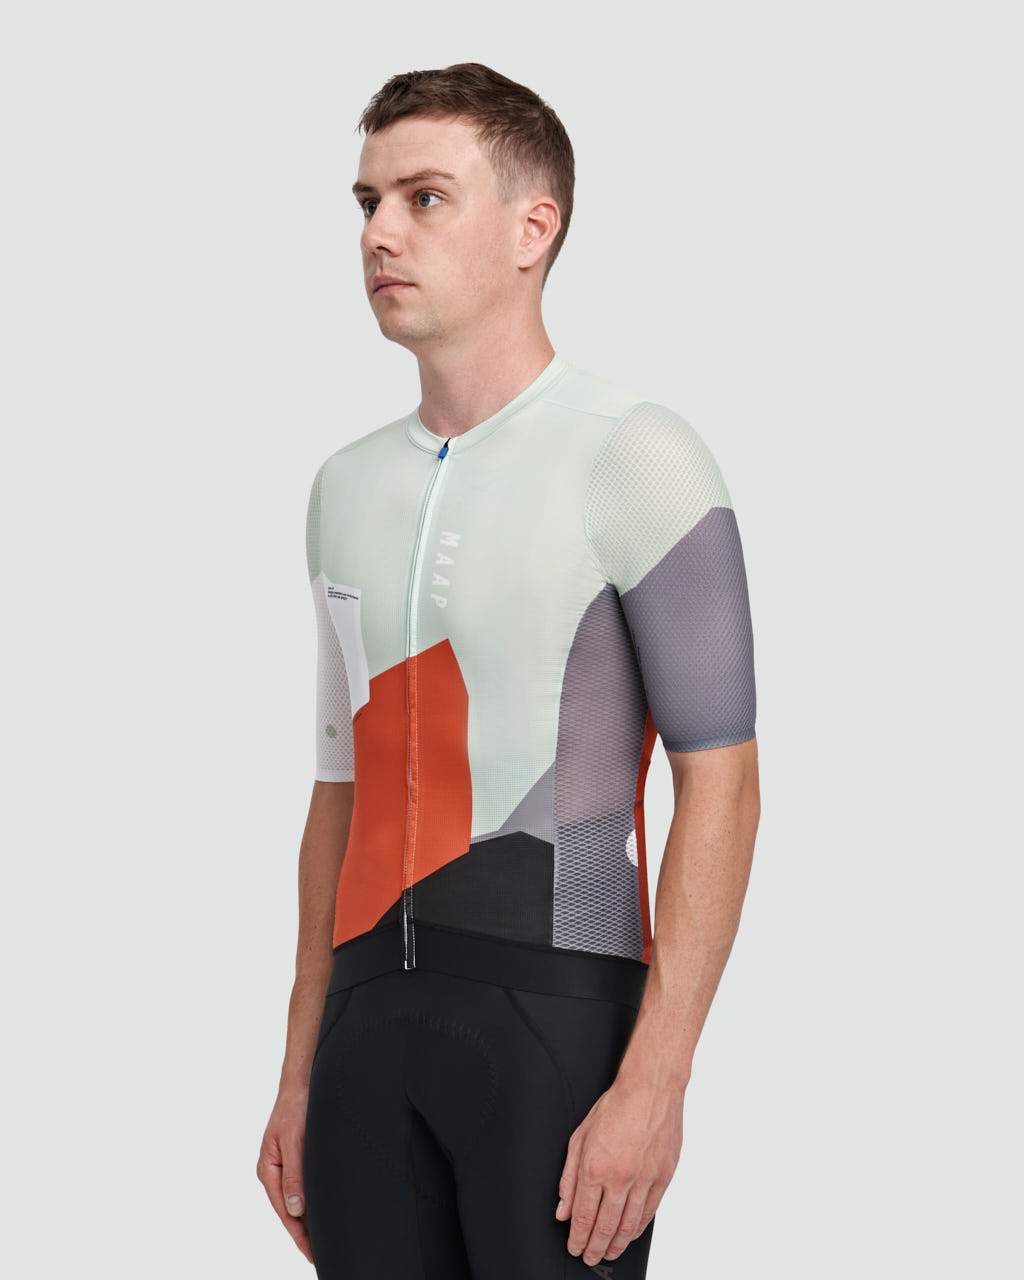 Allied Pro Air Jersey - MAAP Cycling Apparel